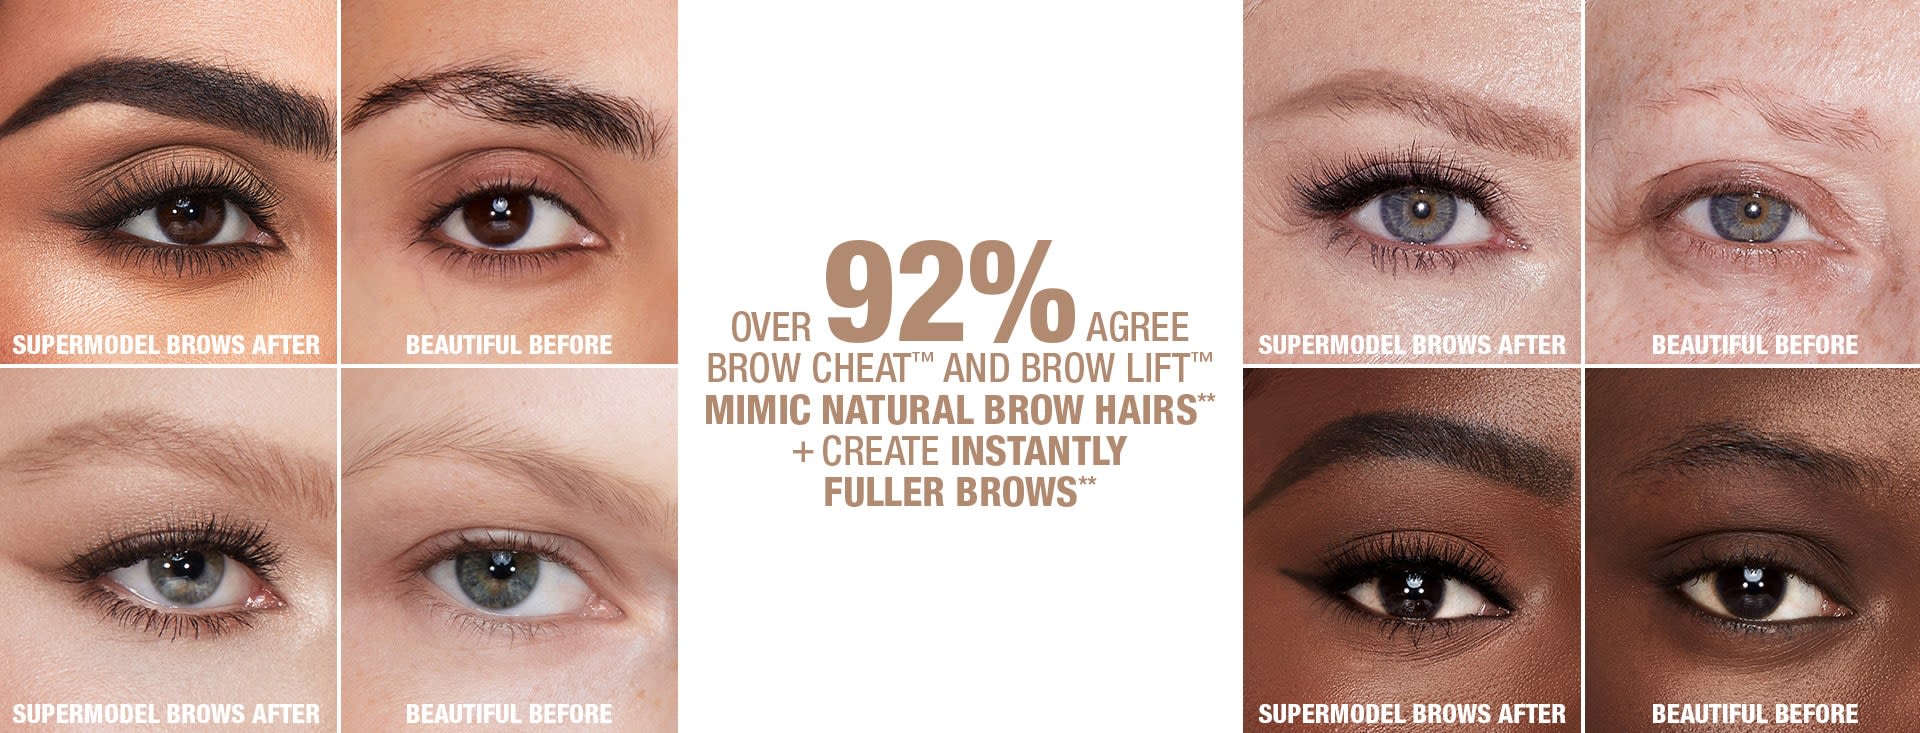 Supermodel Brows Claims